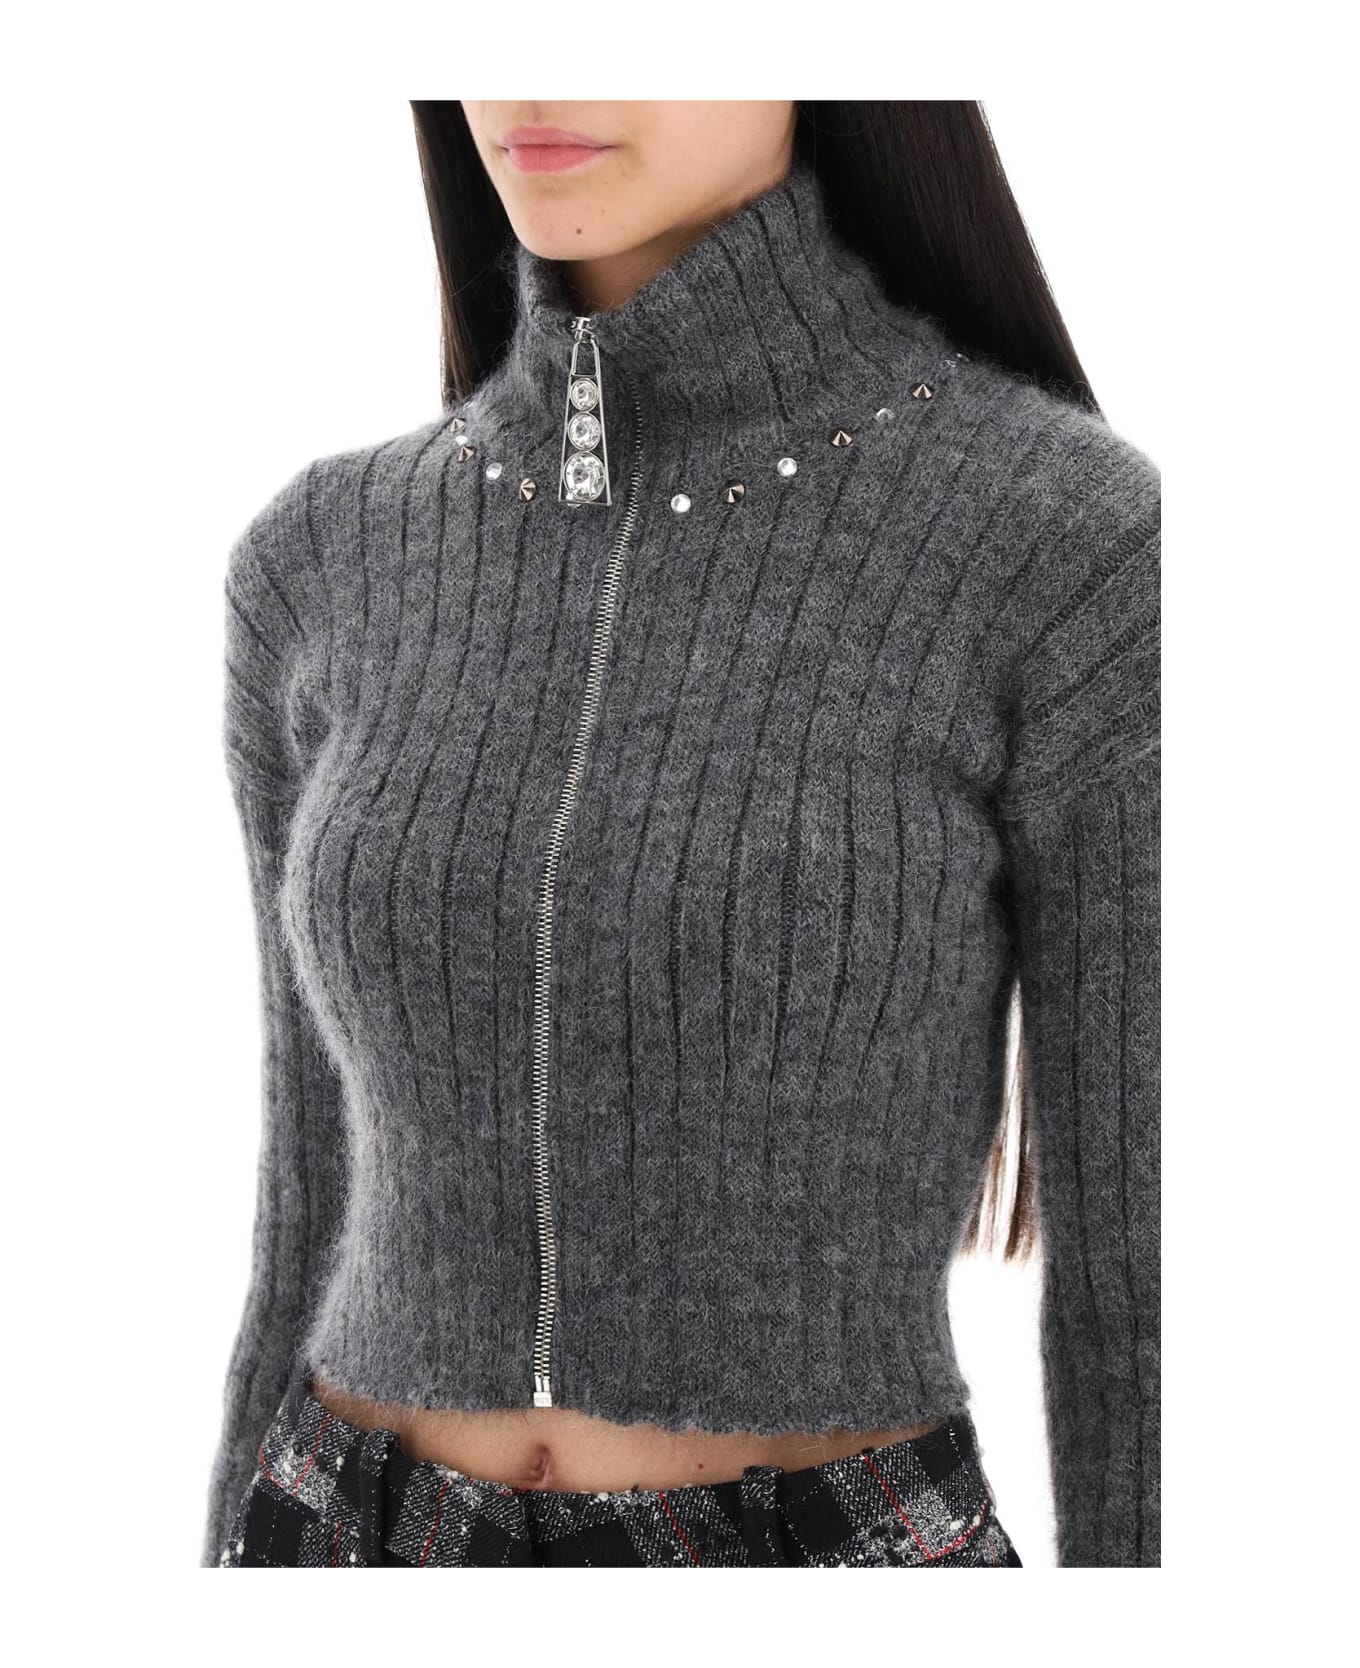 Alessandra Rich Cropped Cardigan With Zipper And Appliques - GREY MELANGE (Grey)